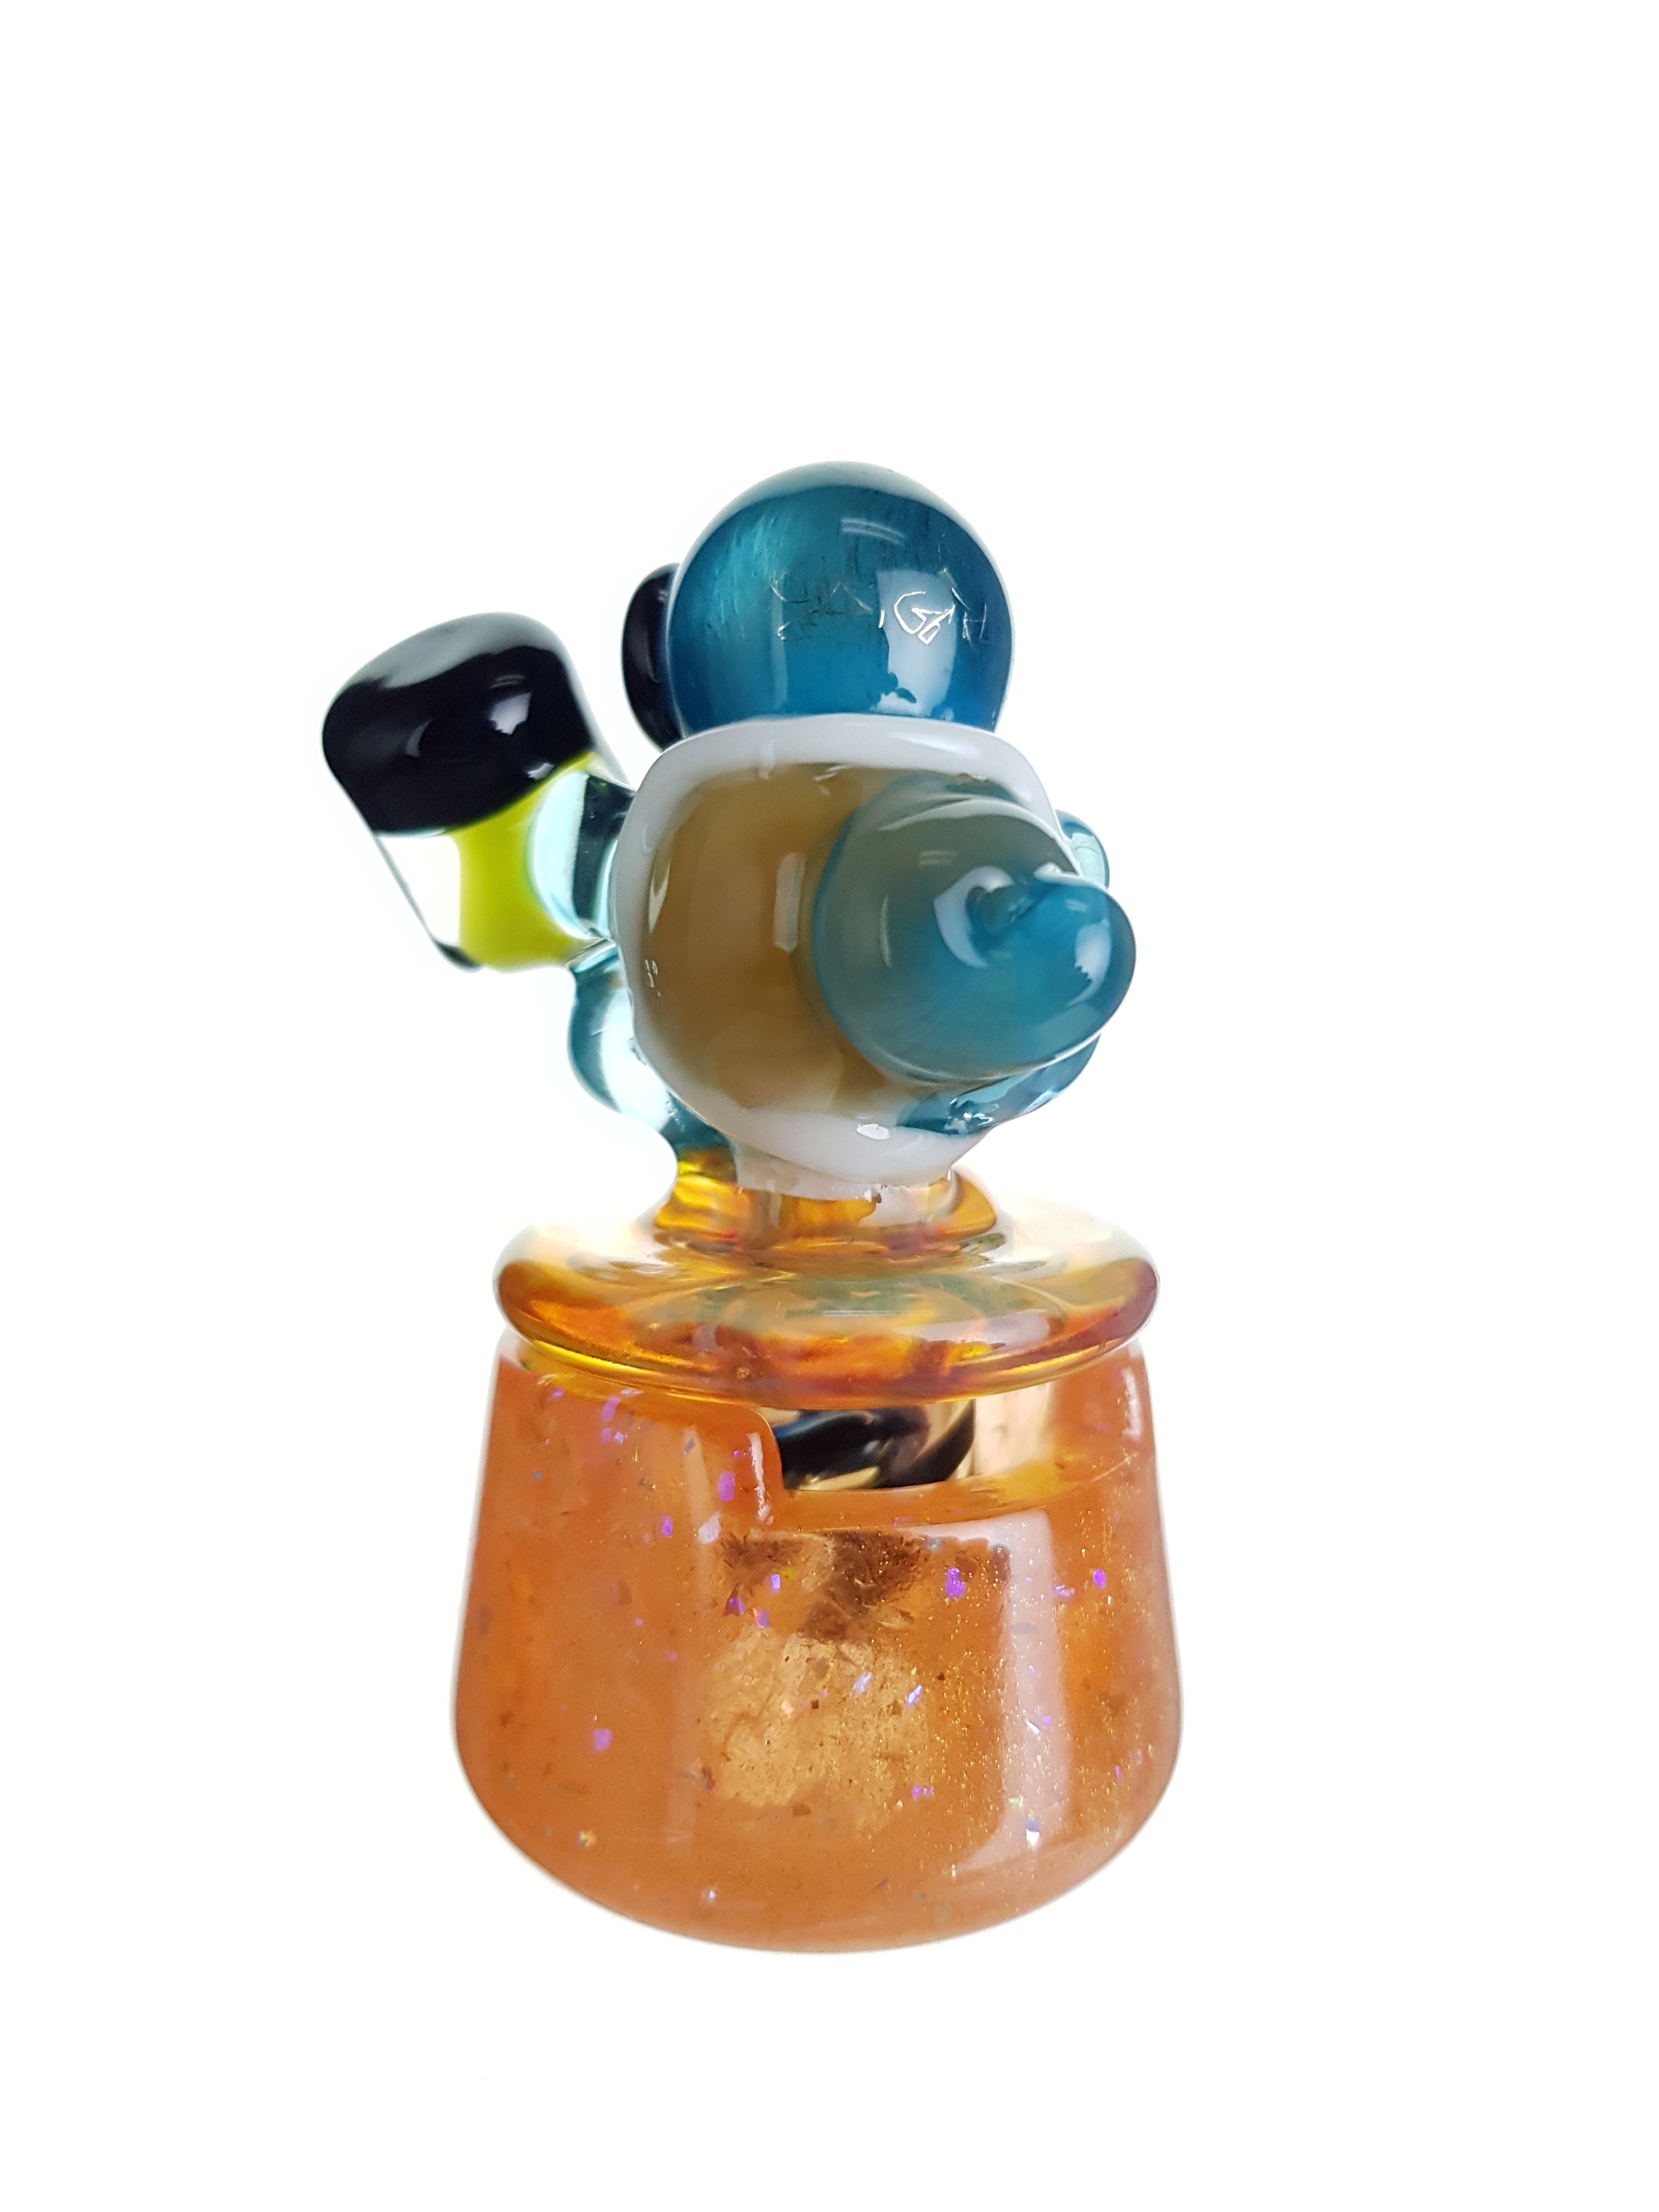 KEYS - Glass Millie Terp Pearls - Pokemon (Select Image) - The Dab Lab